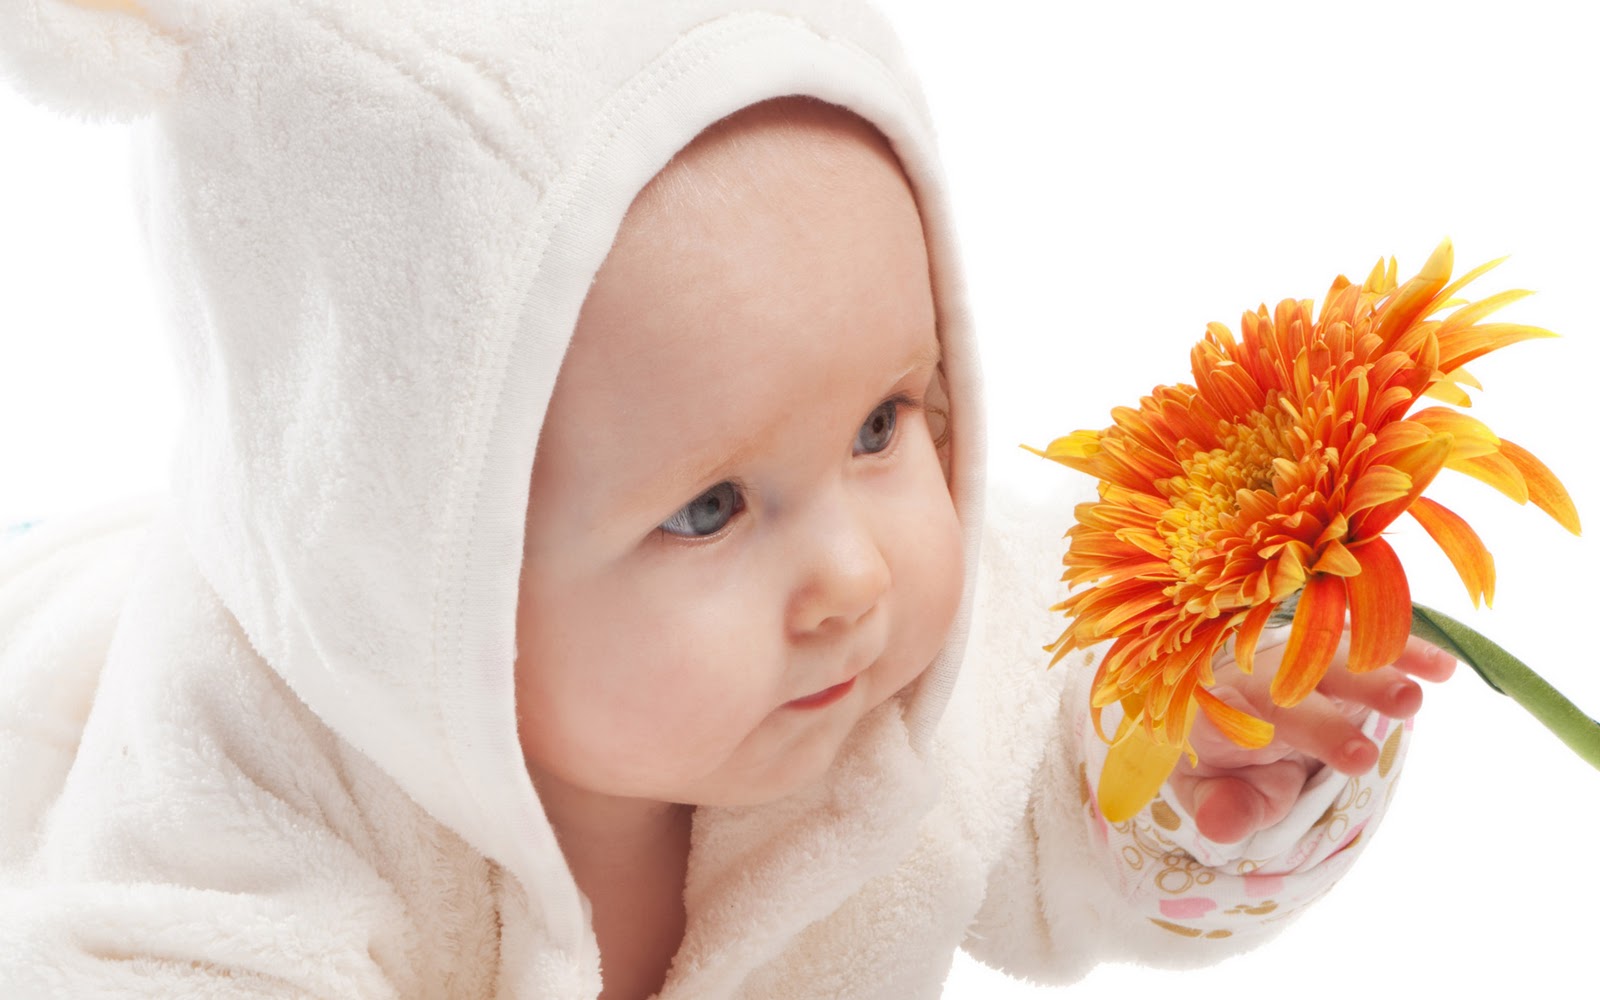  Kids Wallpapers Smiling Crying Babies 6 New Baby Wallpapers 2012